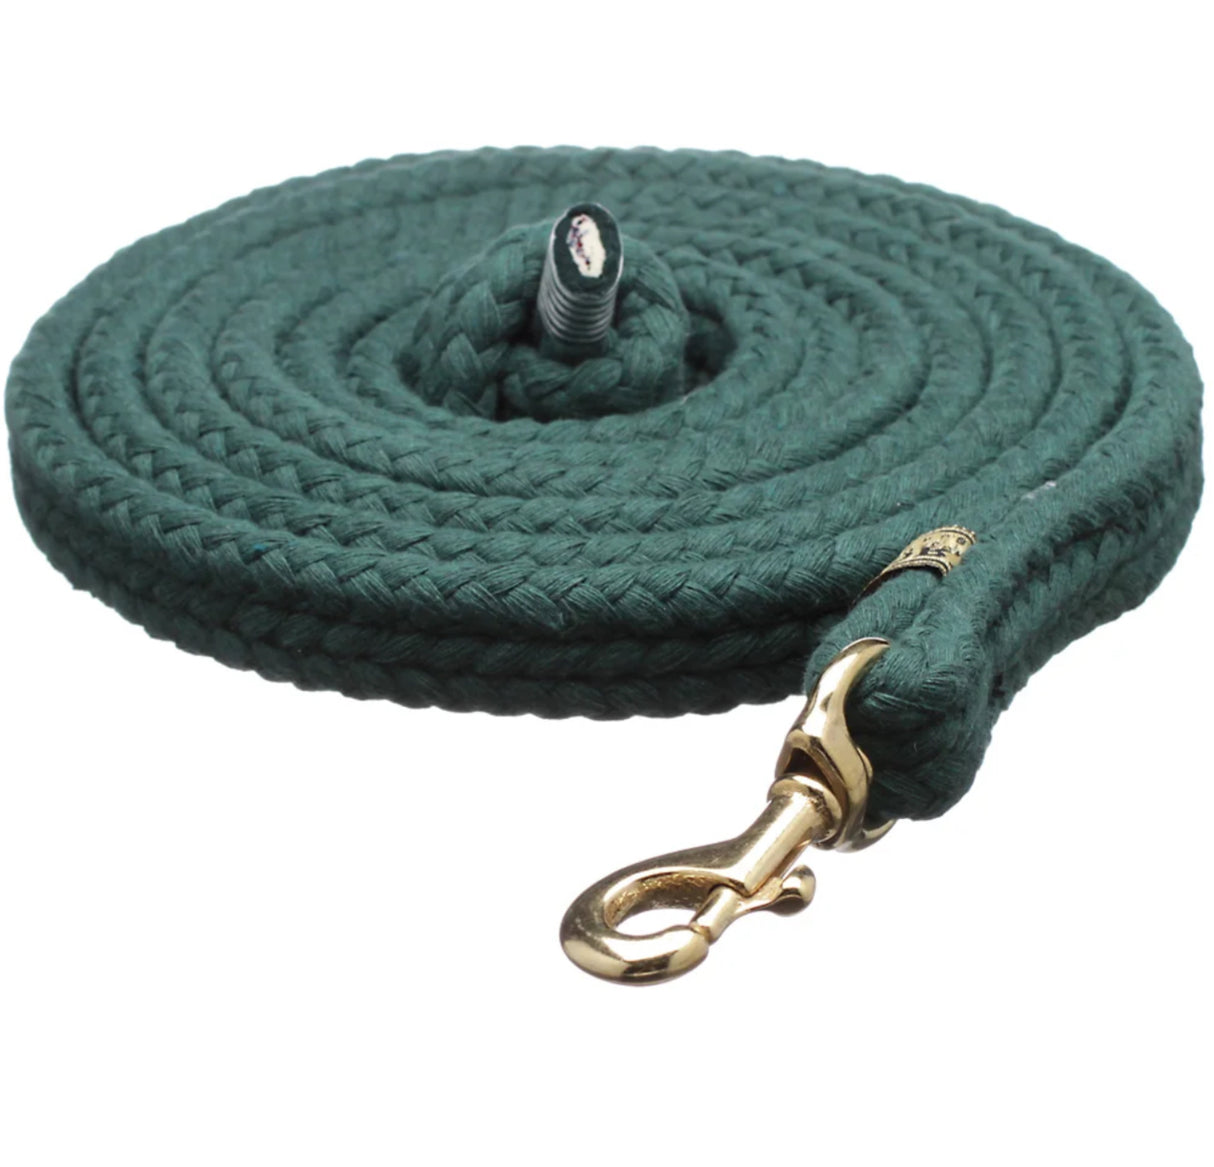 1” x 9’ BRAIDED COTTON ROPE LEAD